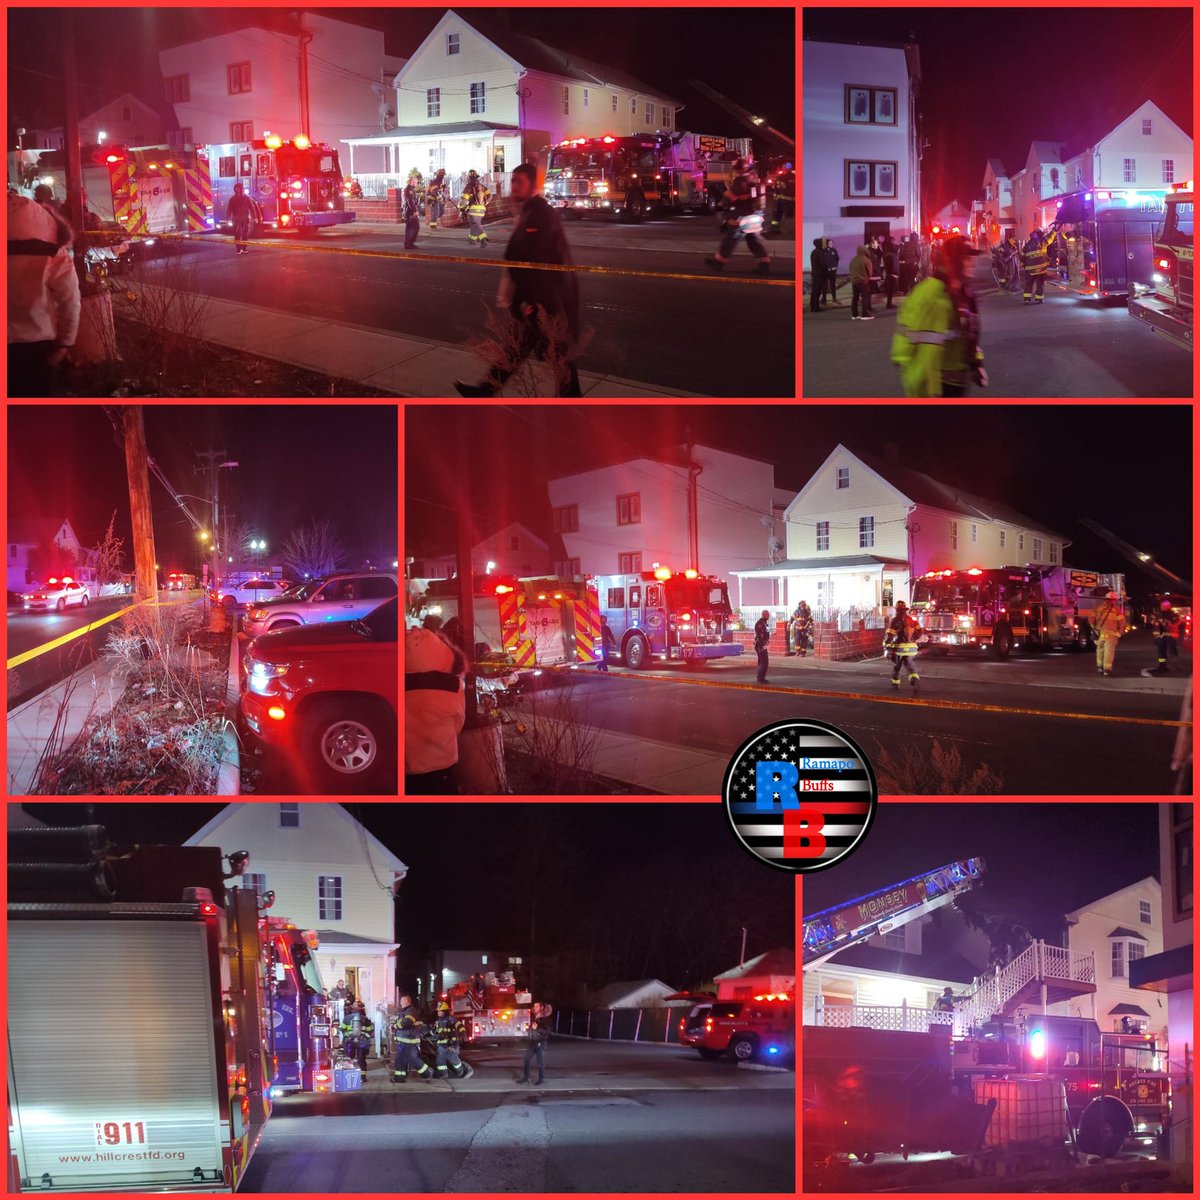 Fire and emergency personnel are on the scene of a reported structure fire at 29 north Madison Avenue spring valley, chaverim of rockland is on scene with busses to keep the people warm